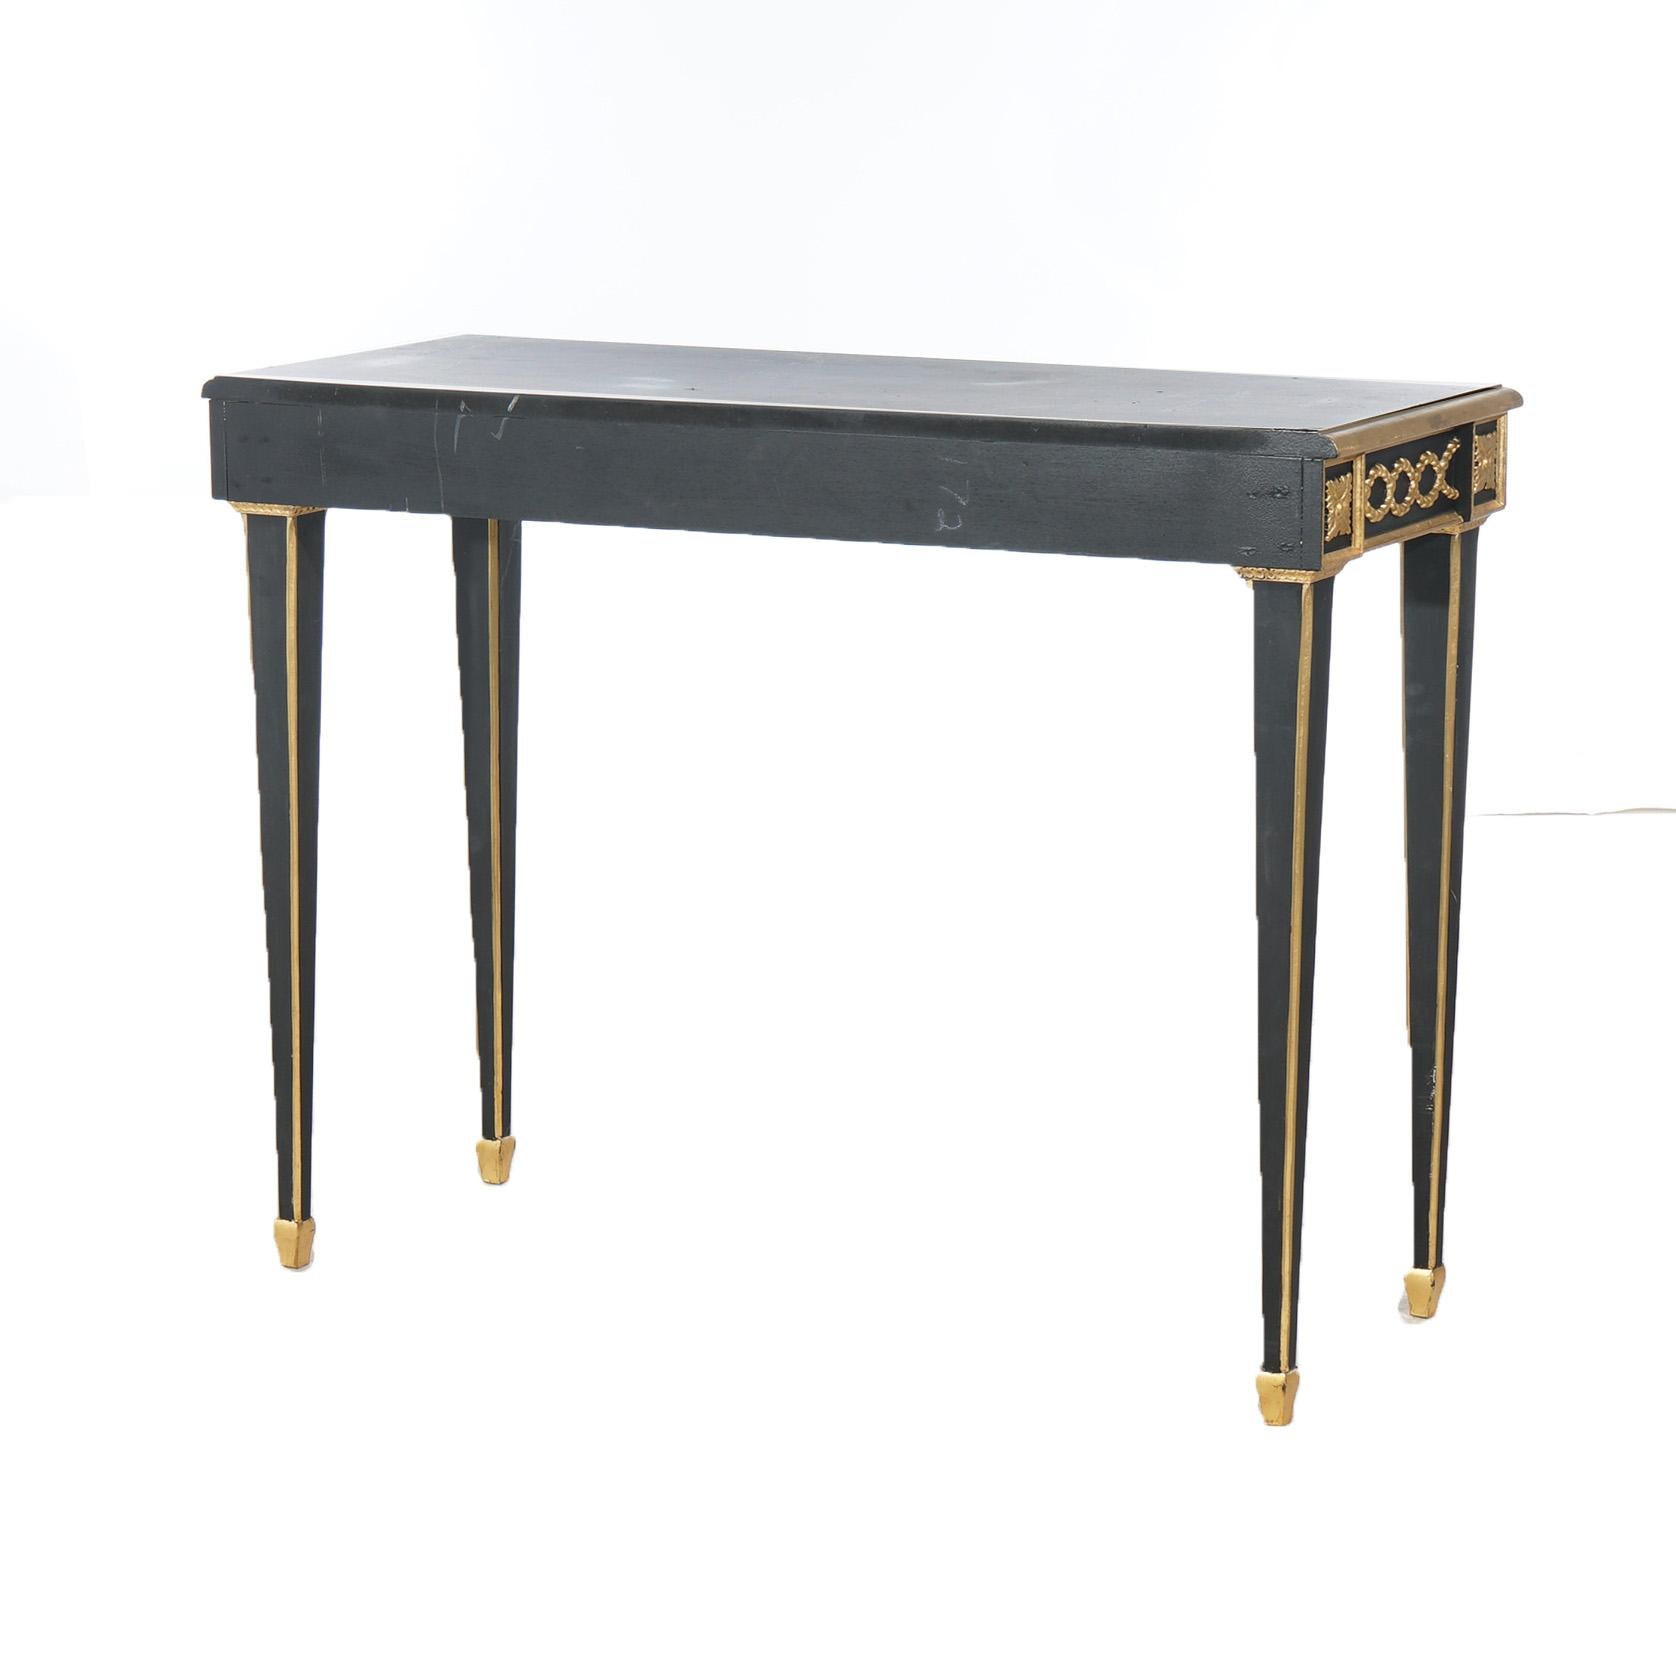 French Empire Style Ebonized & Gilt Console Table 20thC In Good Condition For Sale In Big Flats, NY